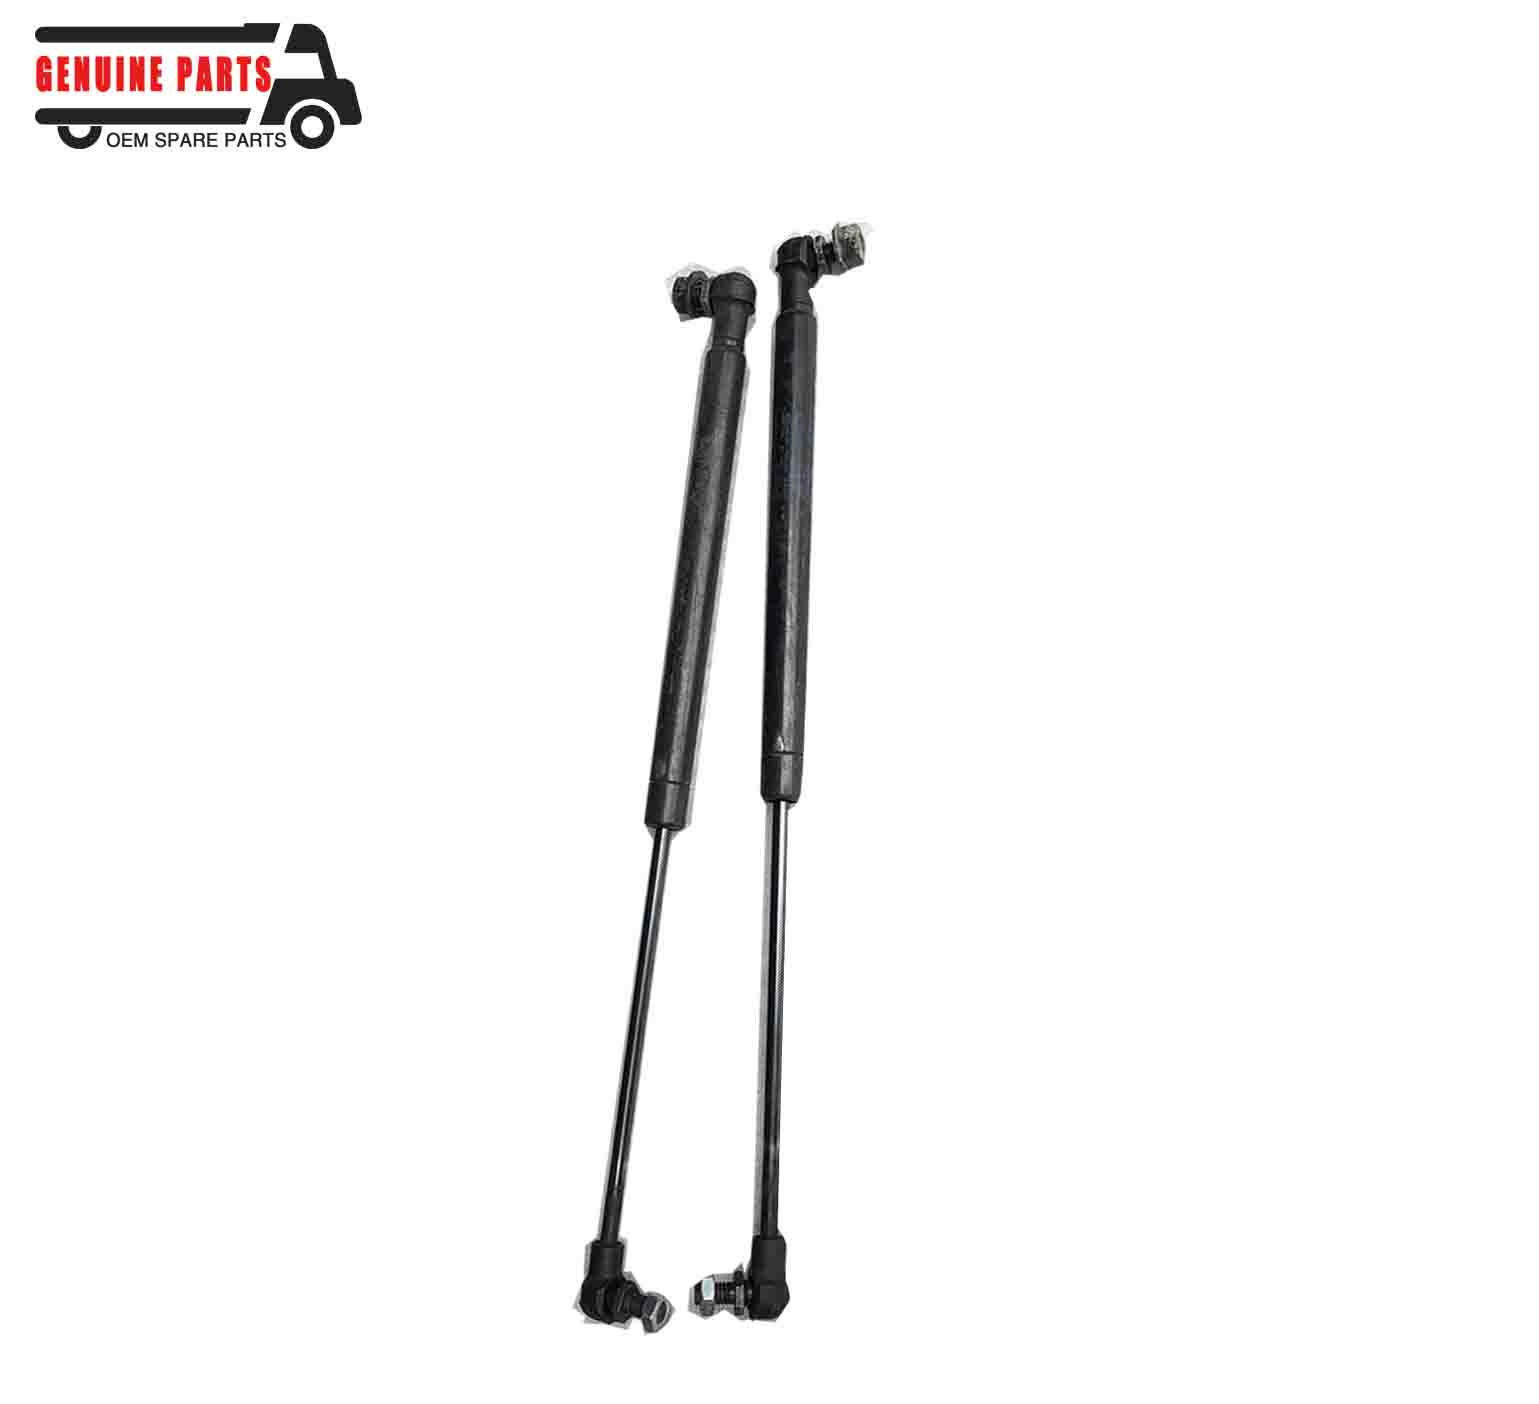 China Guangzhou 1447971 Used Sleeper Pole Used Truck For Scania Truck For Other Auto Parts